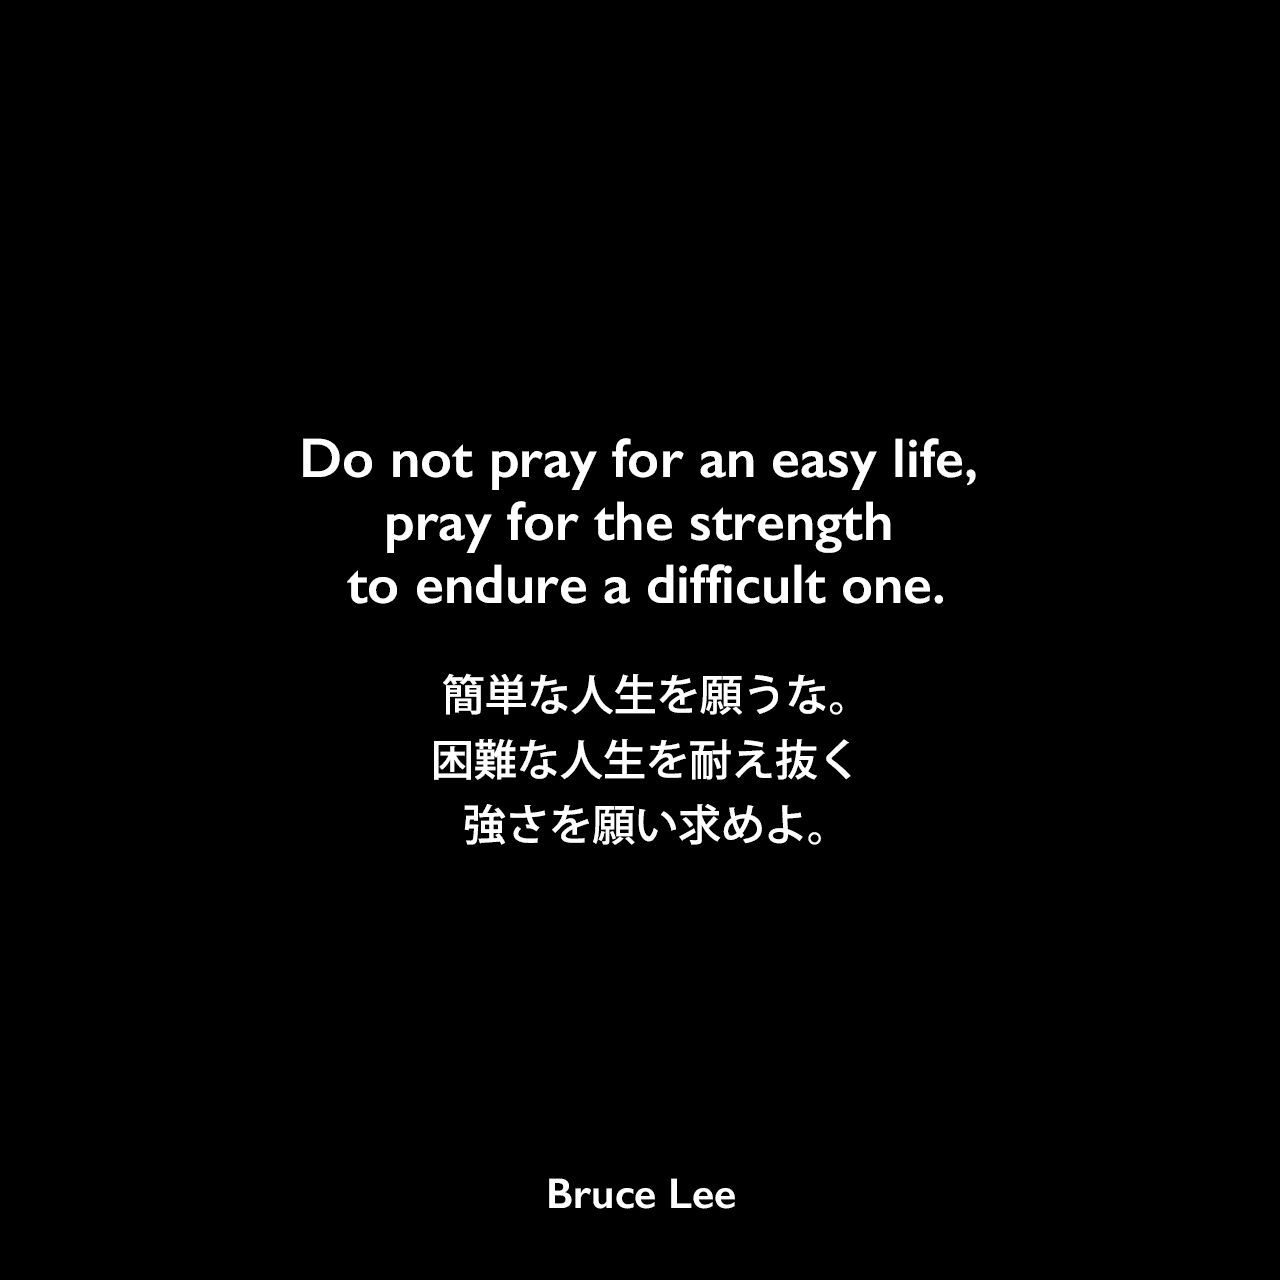 Do not pray for an easy life, pray for the strength to endure a difficult one.簡単な人生を願うな。困難な人生を耐え抜く強さを願い求めよ。Bruce Lee